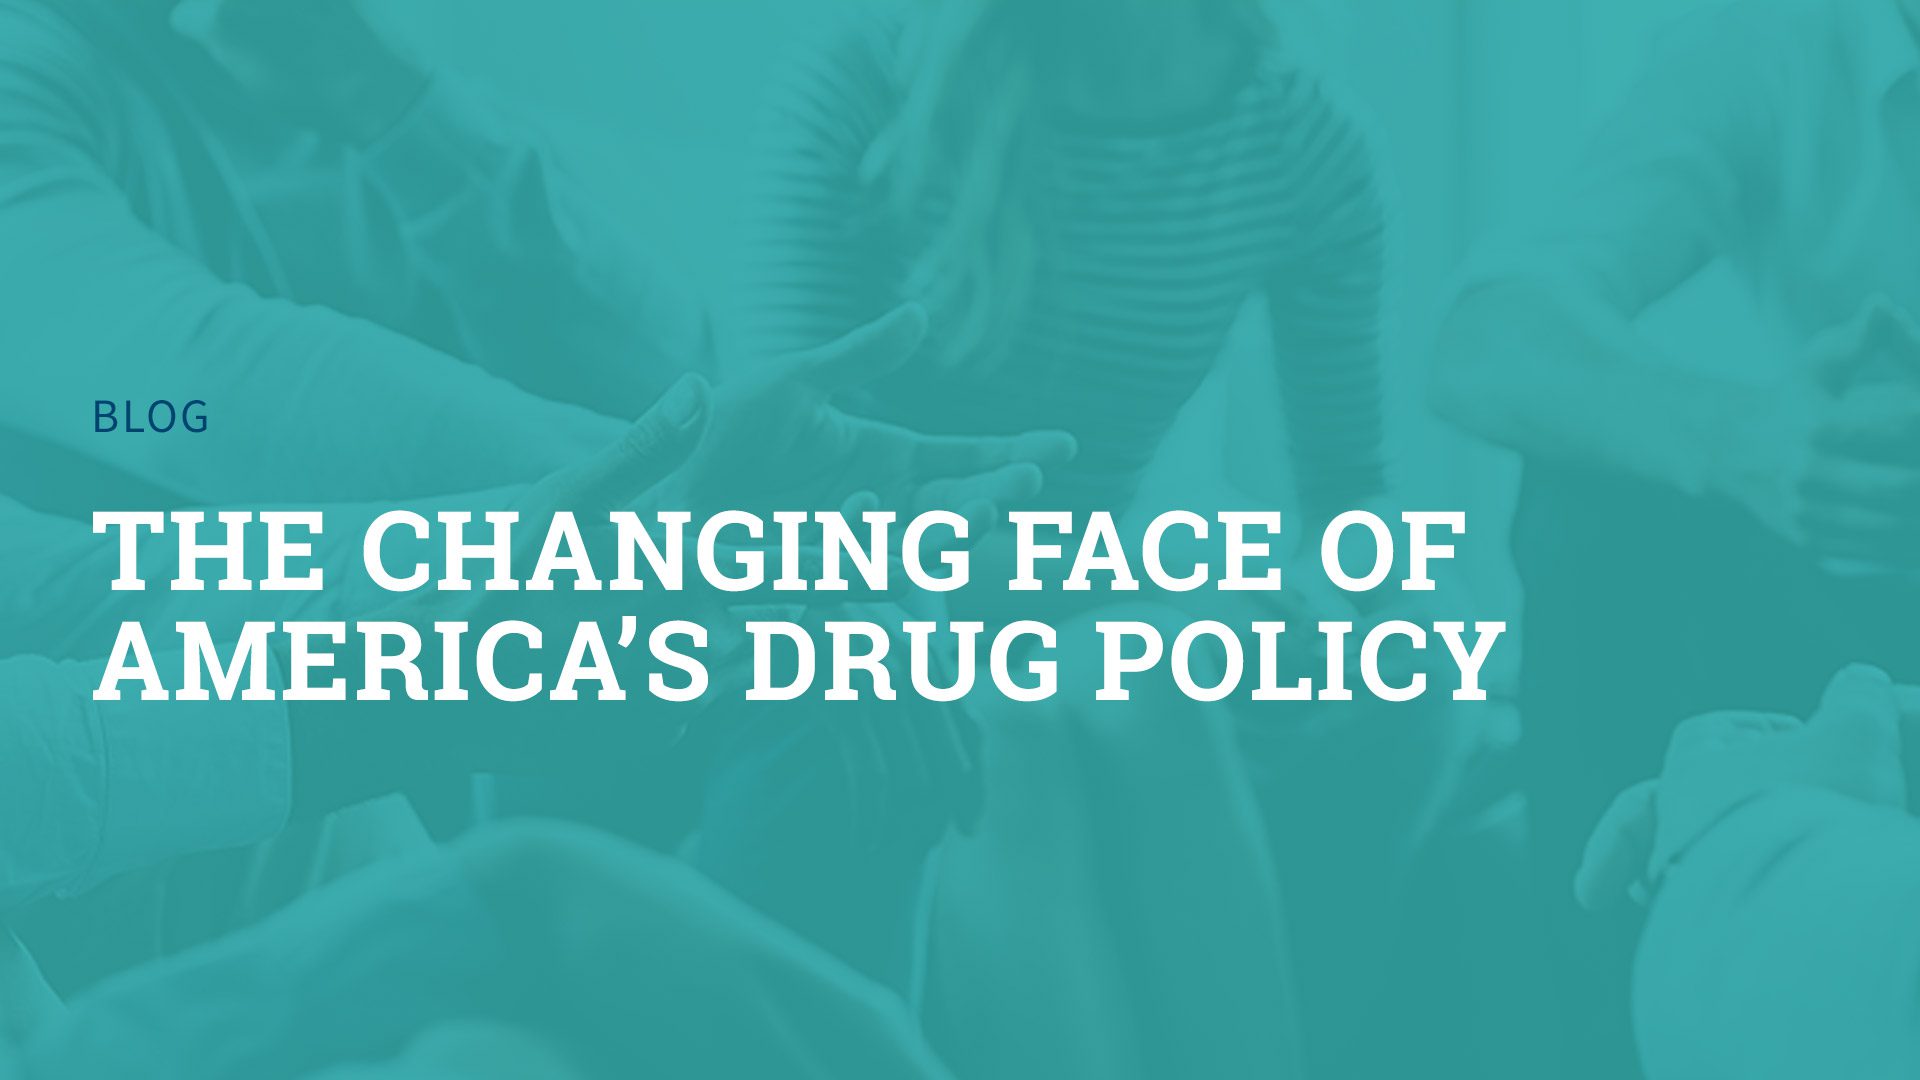 The Changing Face of America's Drug Policy